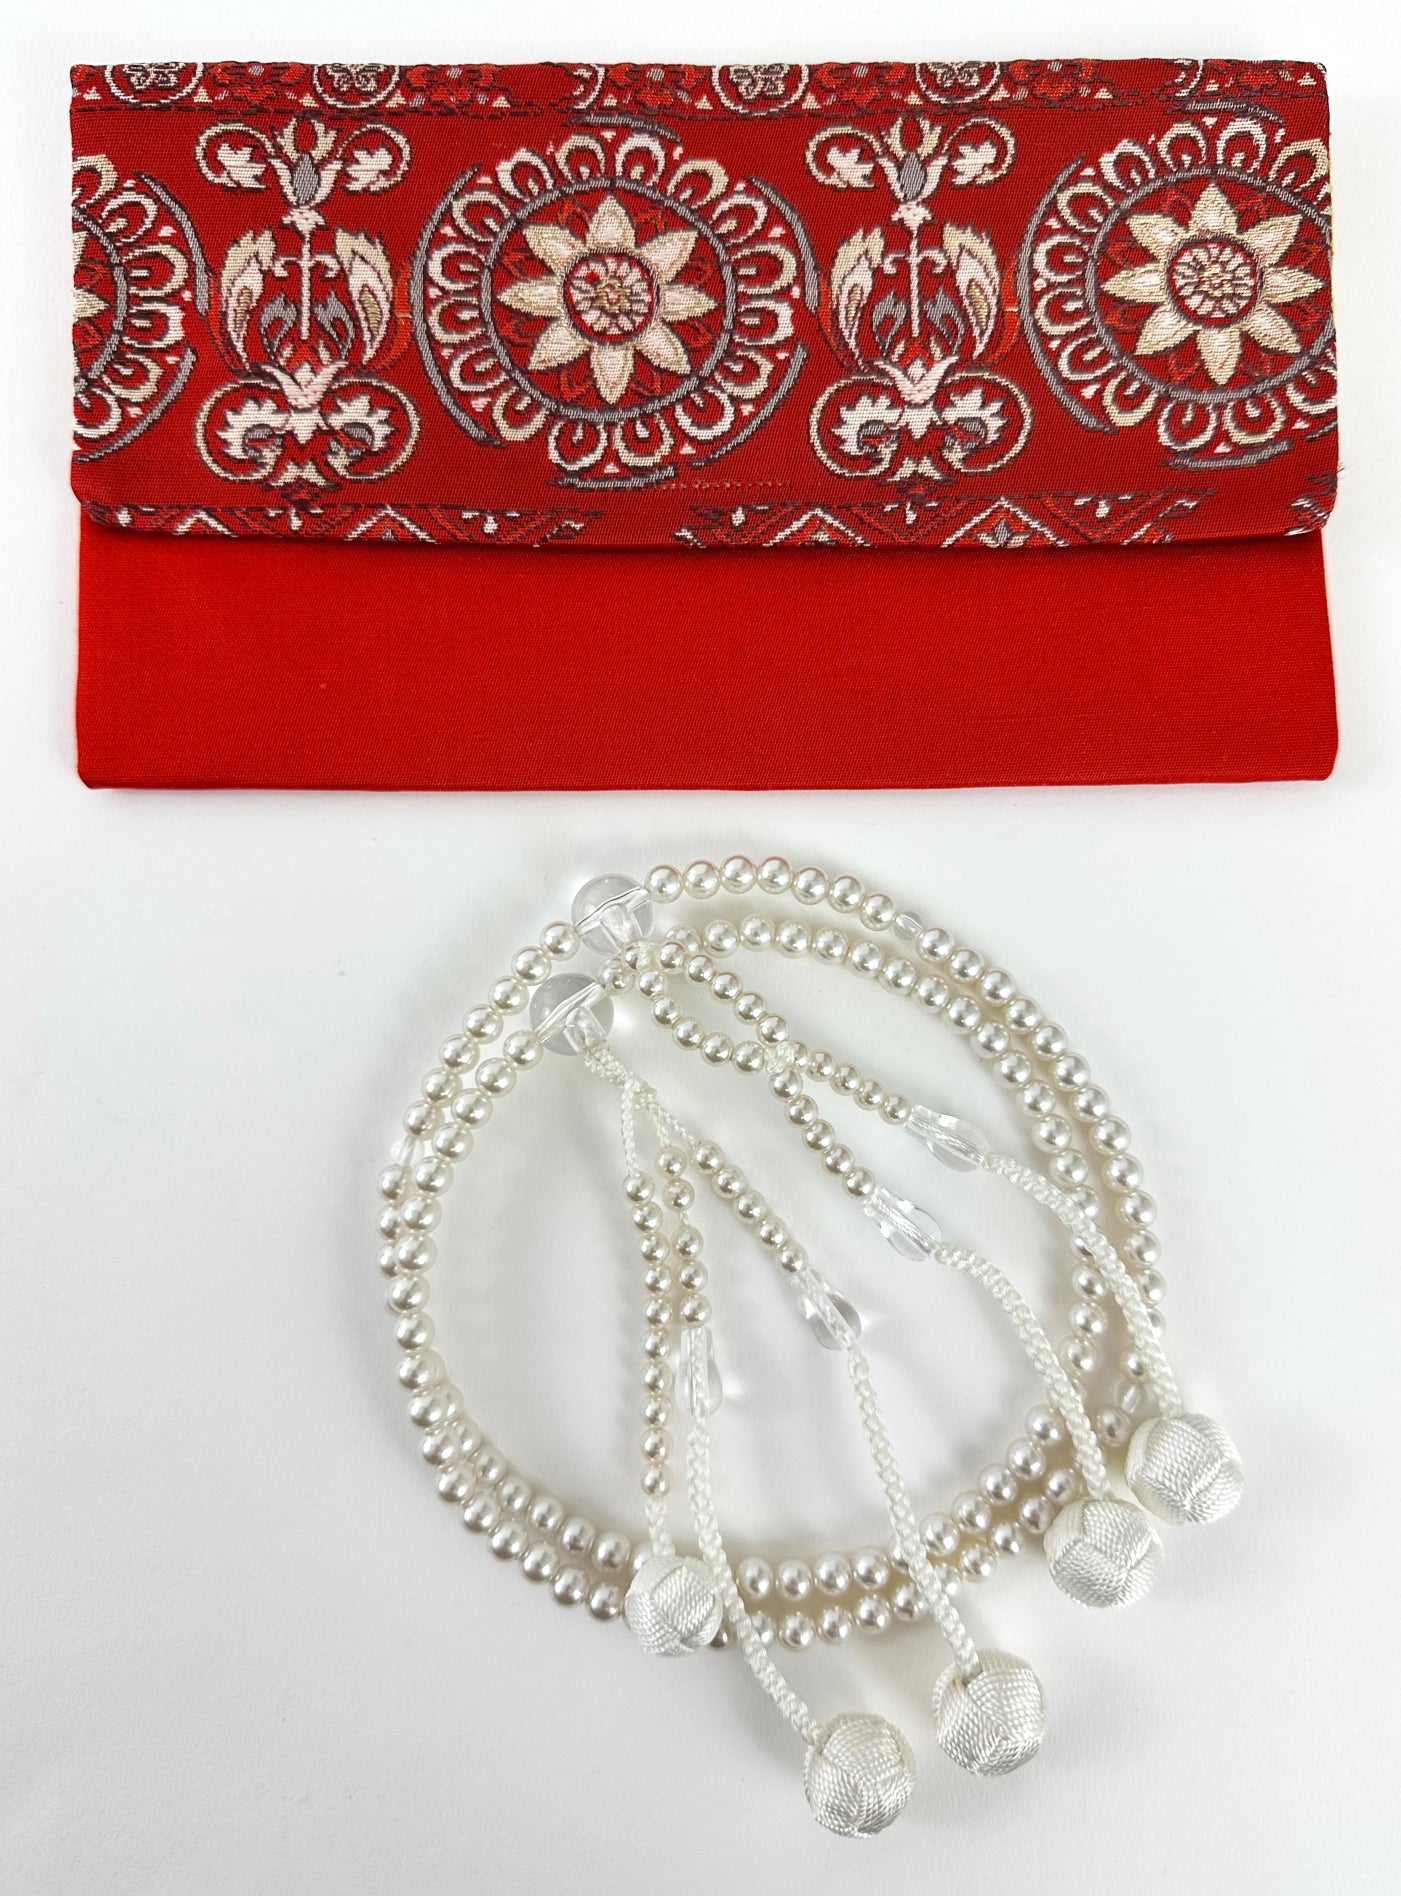 White Pearl Beads with Knitted Tassels Set - Large Beads (Large Beads Case) #2